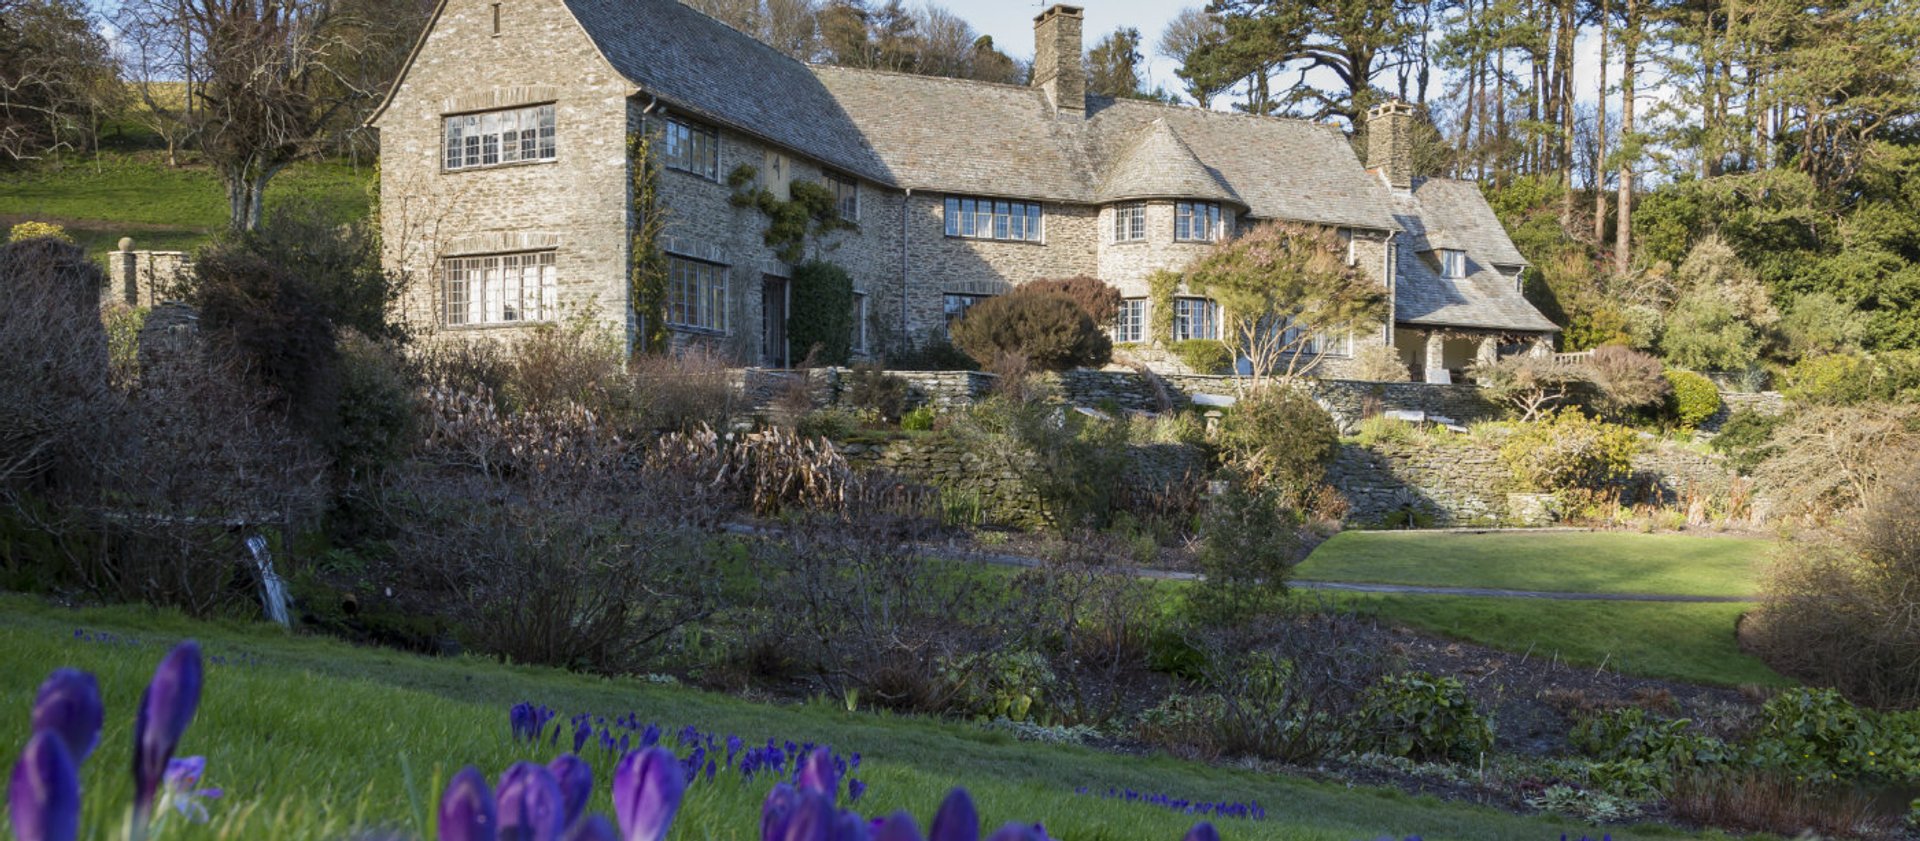 Coleton Fishacre - Dog Friendly visitor attraction near Torquay